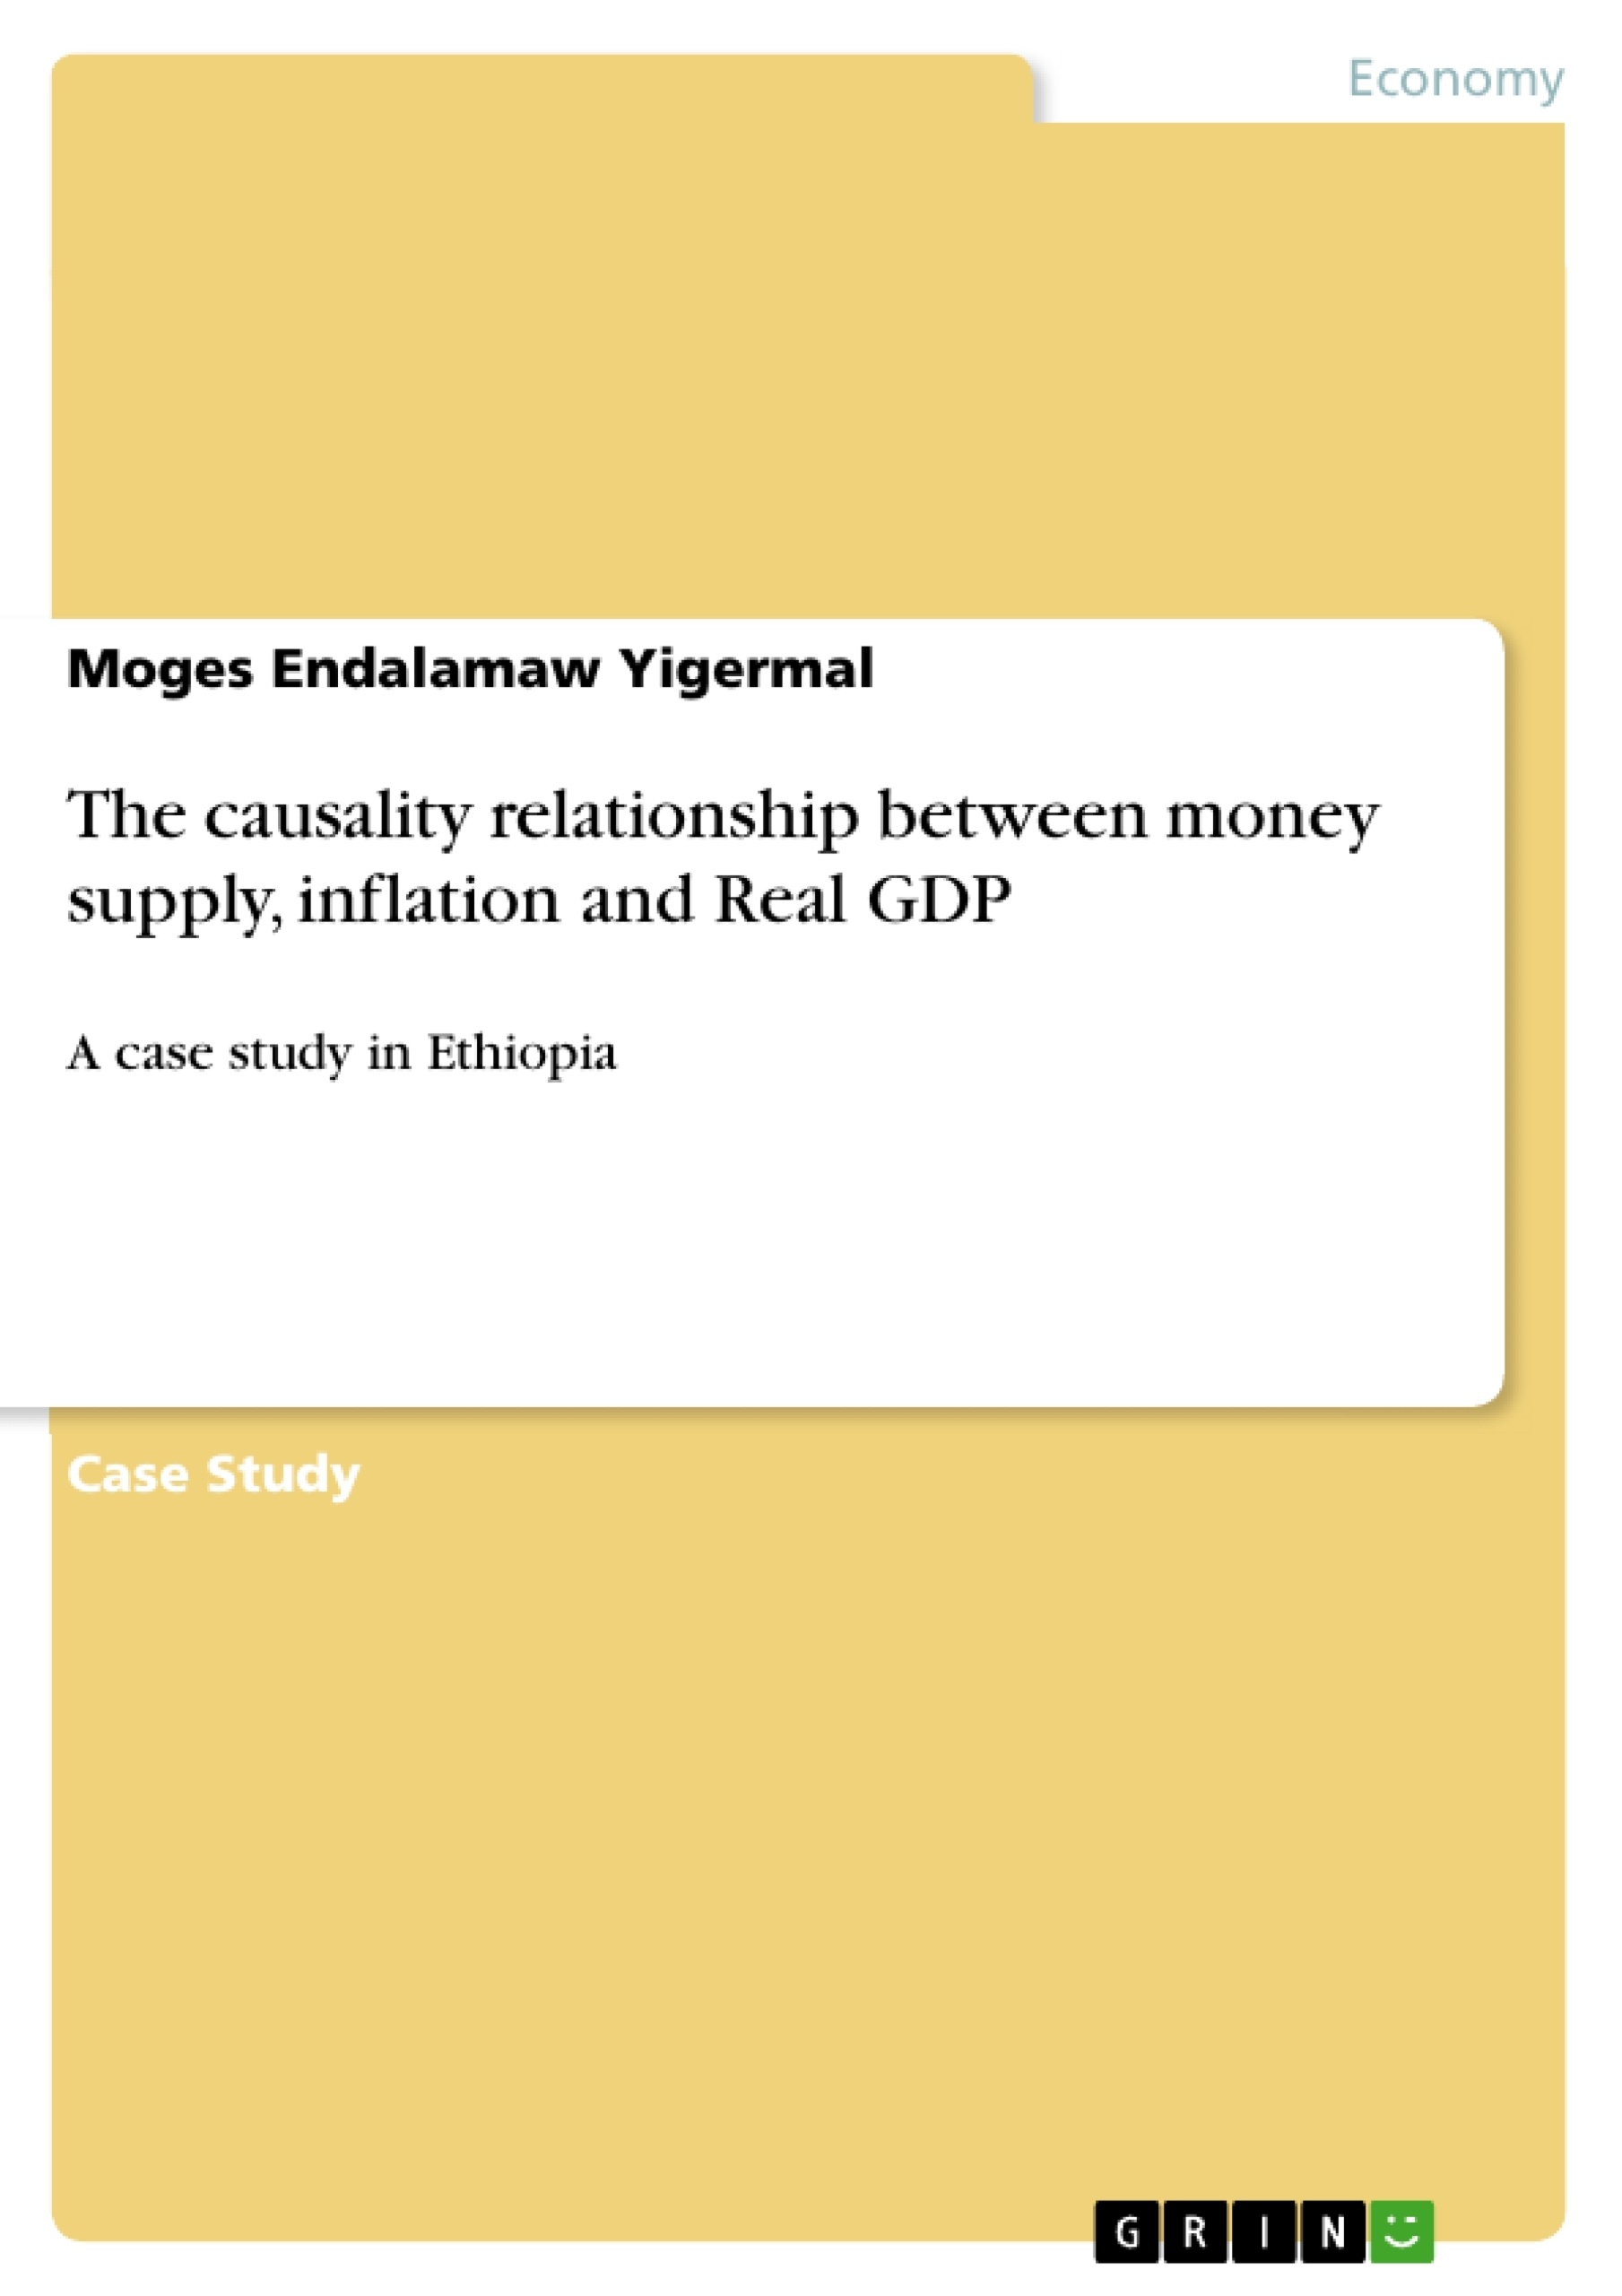 Title: The causality relationship between money supply, inflation and Real GDP